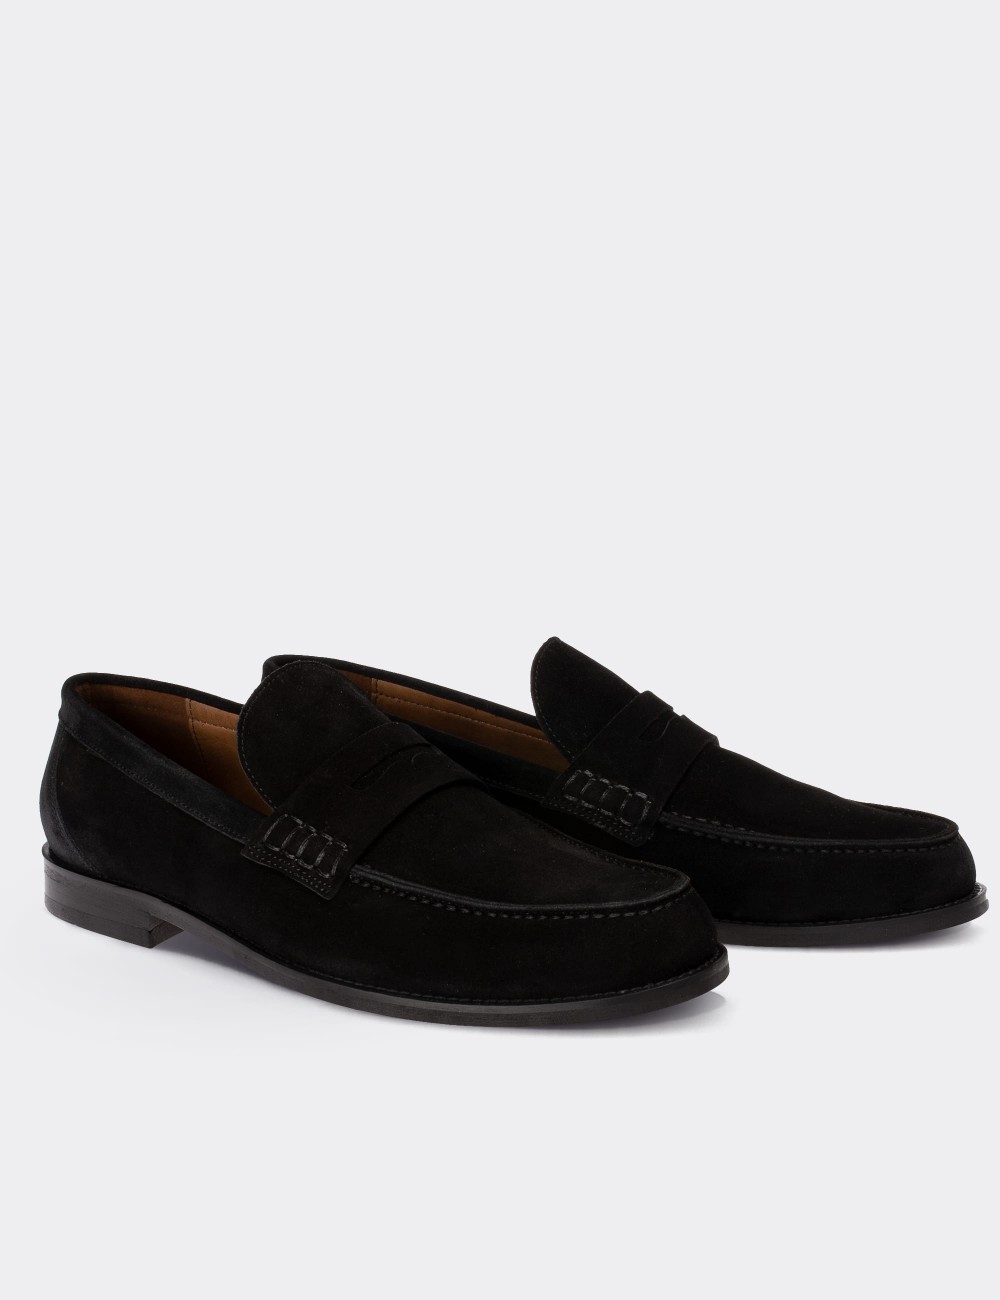 Black Suede Leather Loafers 01538MSYHN03 - Deery